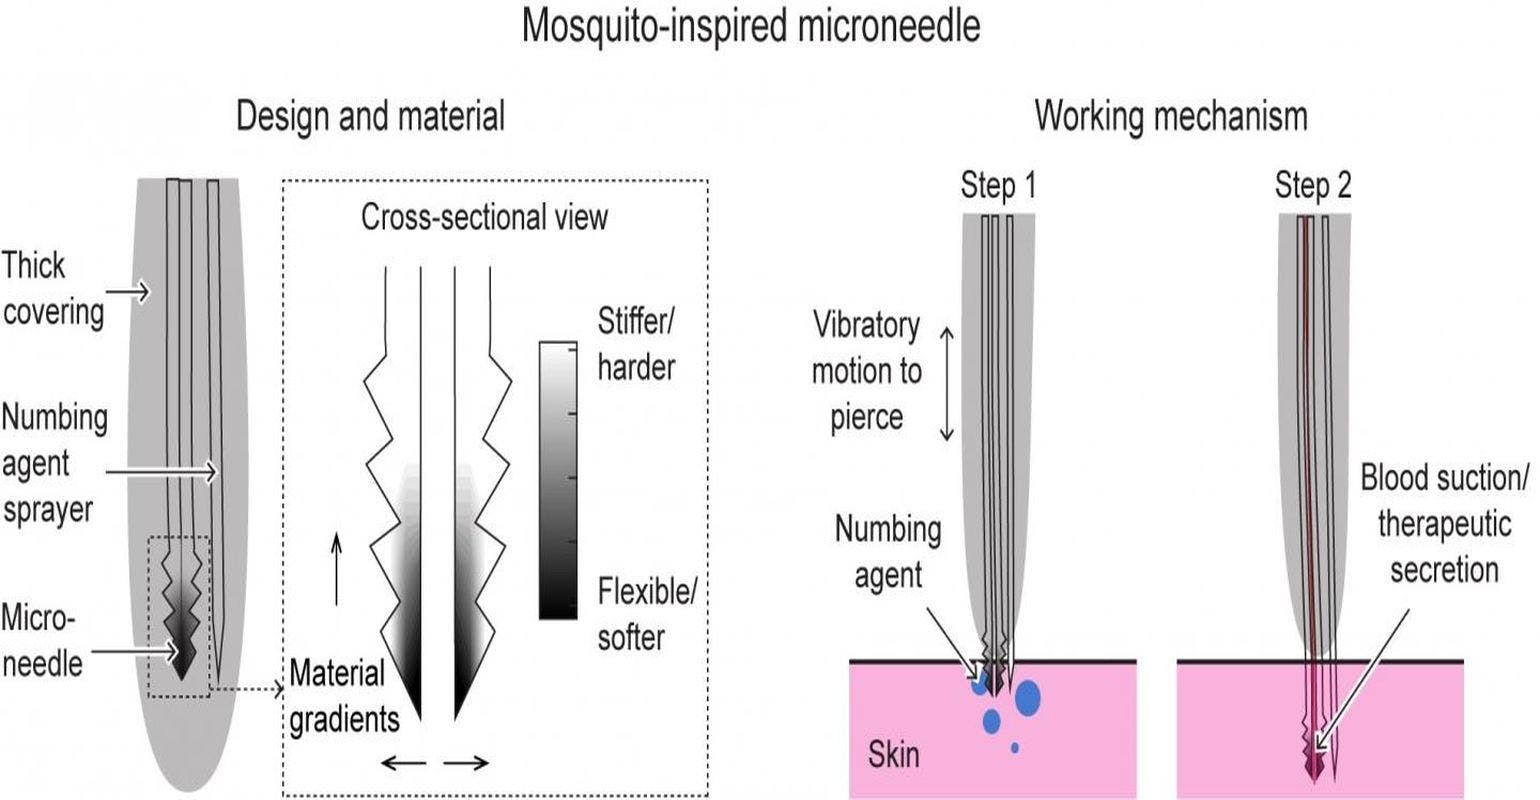 Looking to Mosquitos for a Way to Develop Painless Microneedles